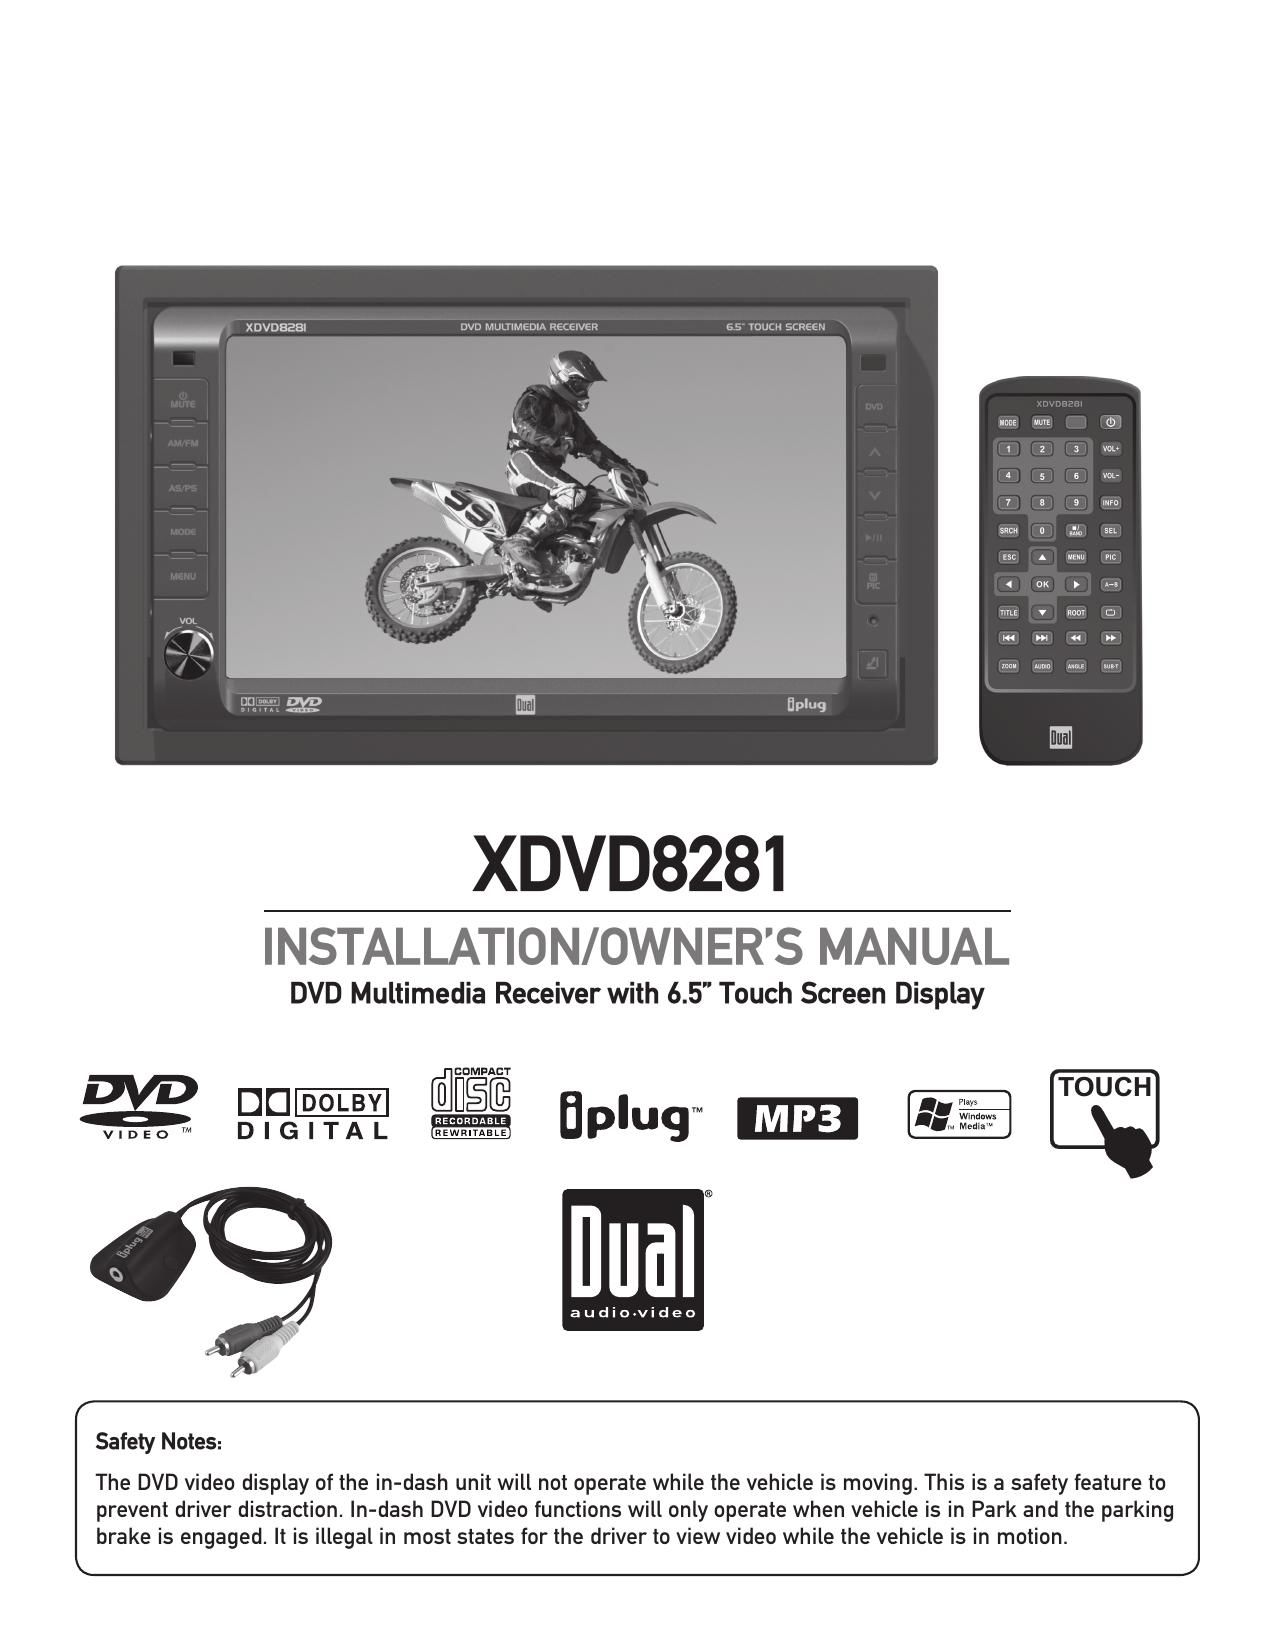 Dual XDVD 8281 Owners Manual